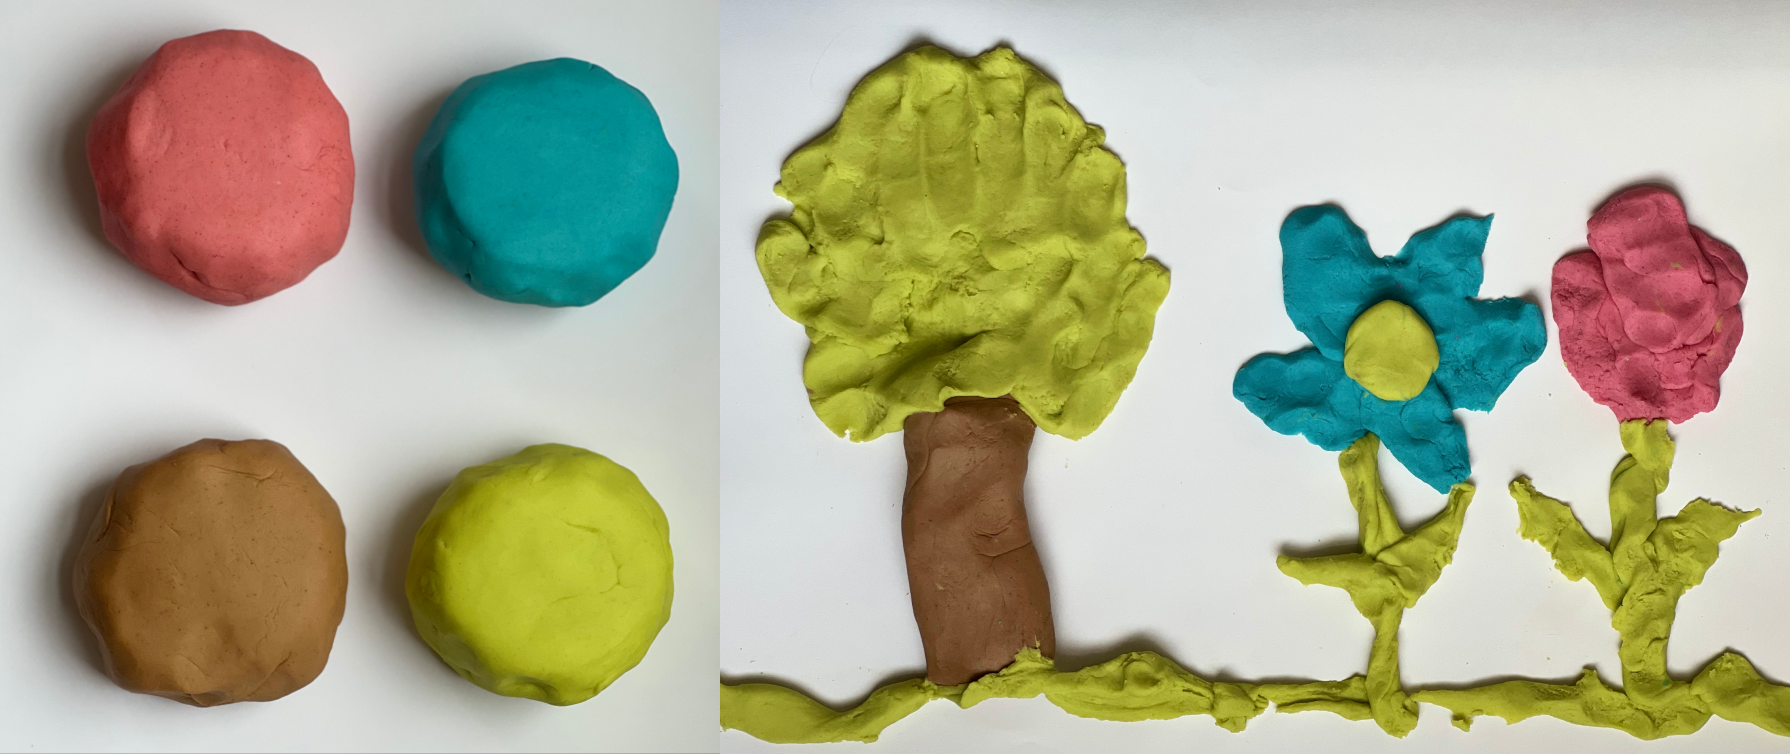 Shows two images, one on the left with 4 colored balls of play dough and an image on the right to see that transformed into flowers and a tree